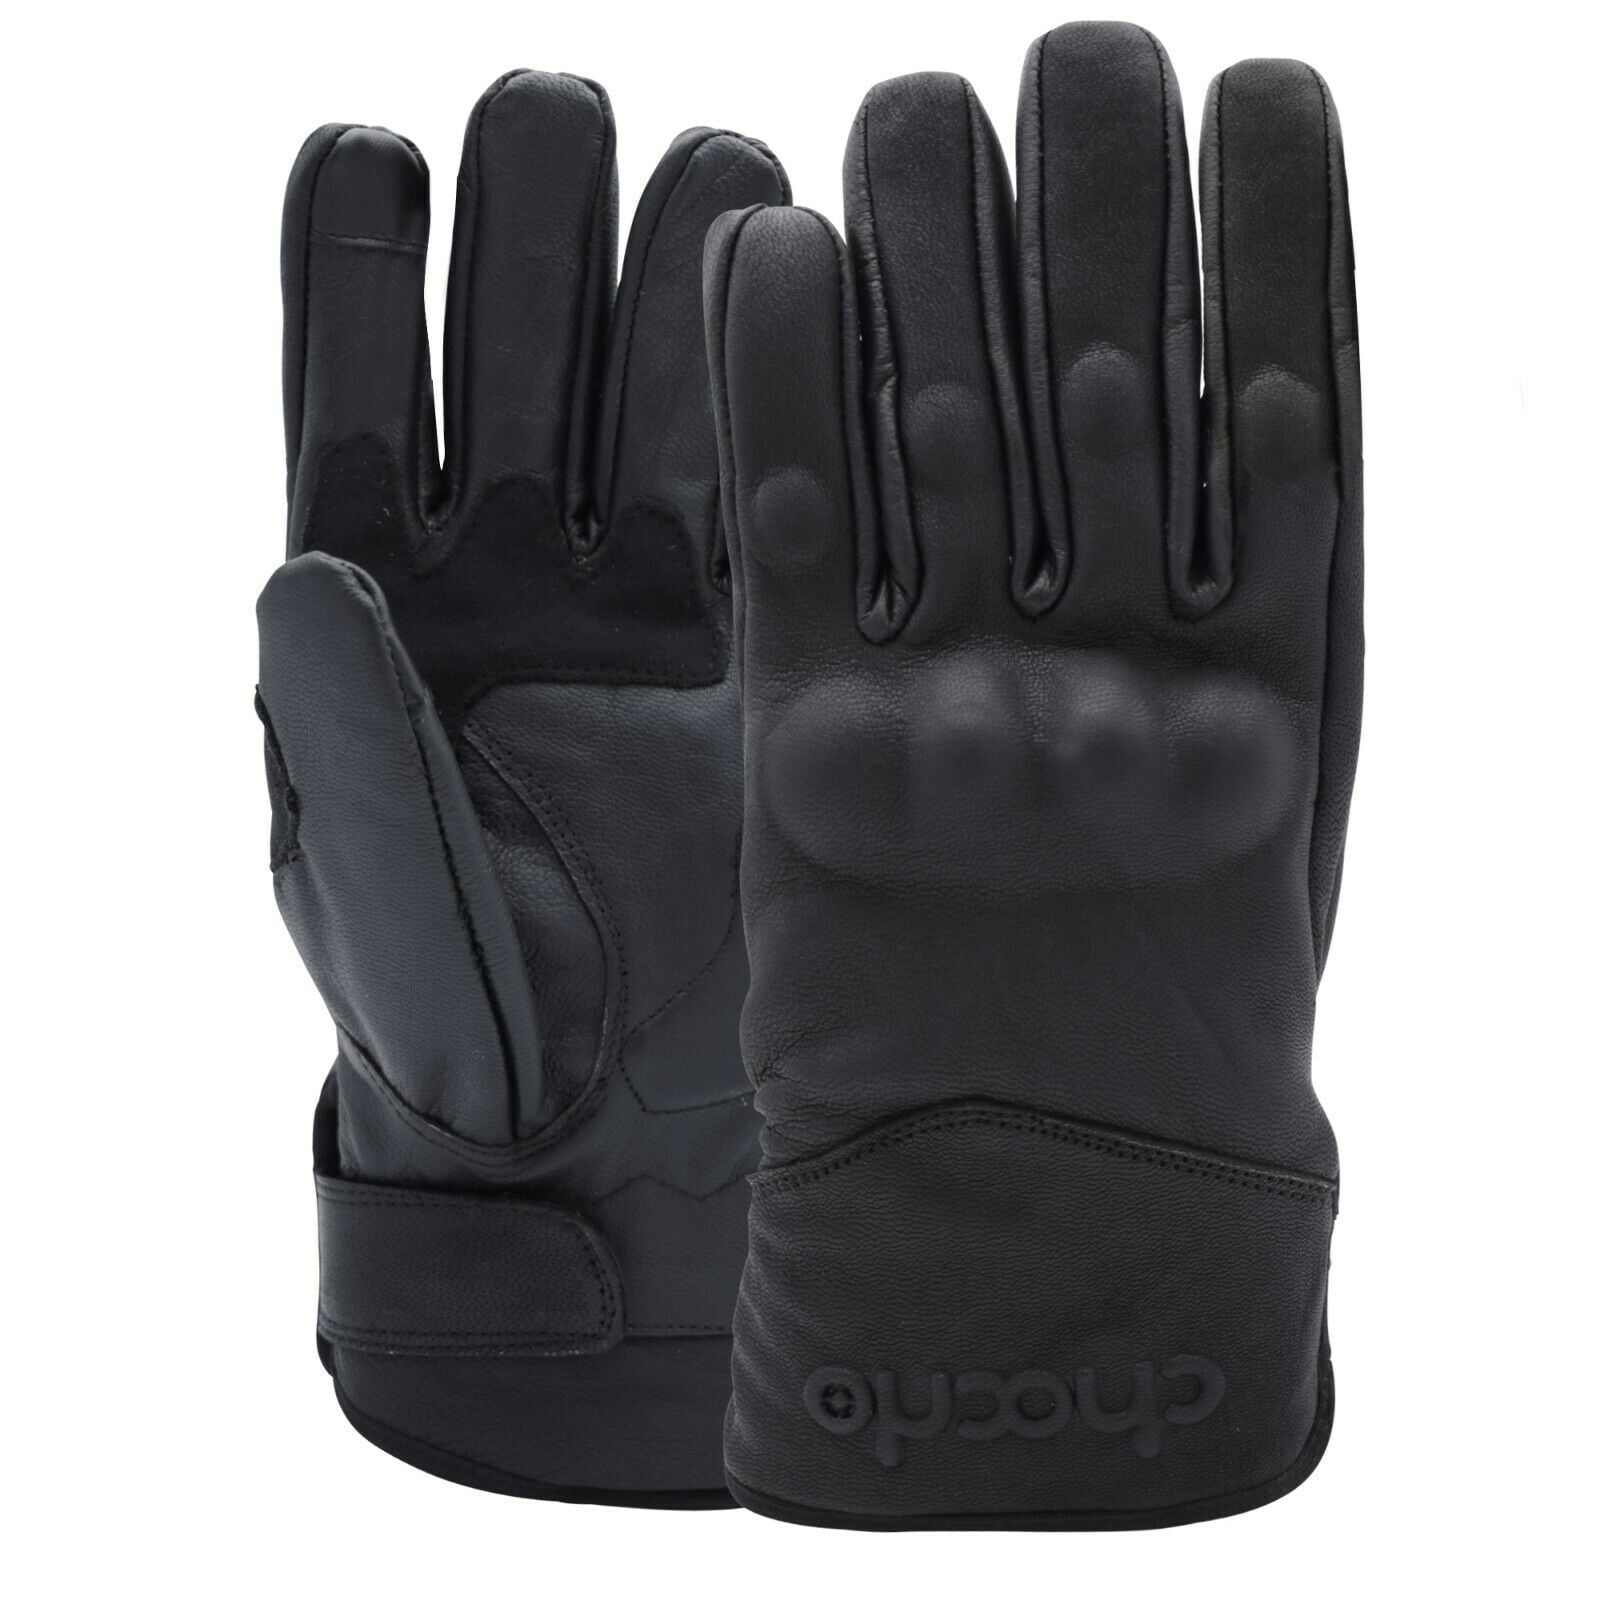 ISLERO Premium Leather Cycling Motorbike Gloves Carbon Fiber Knuckles Protection 